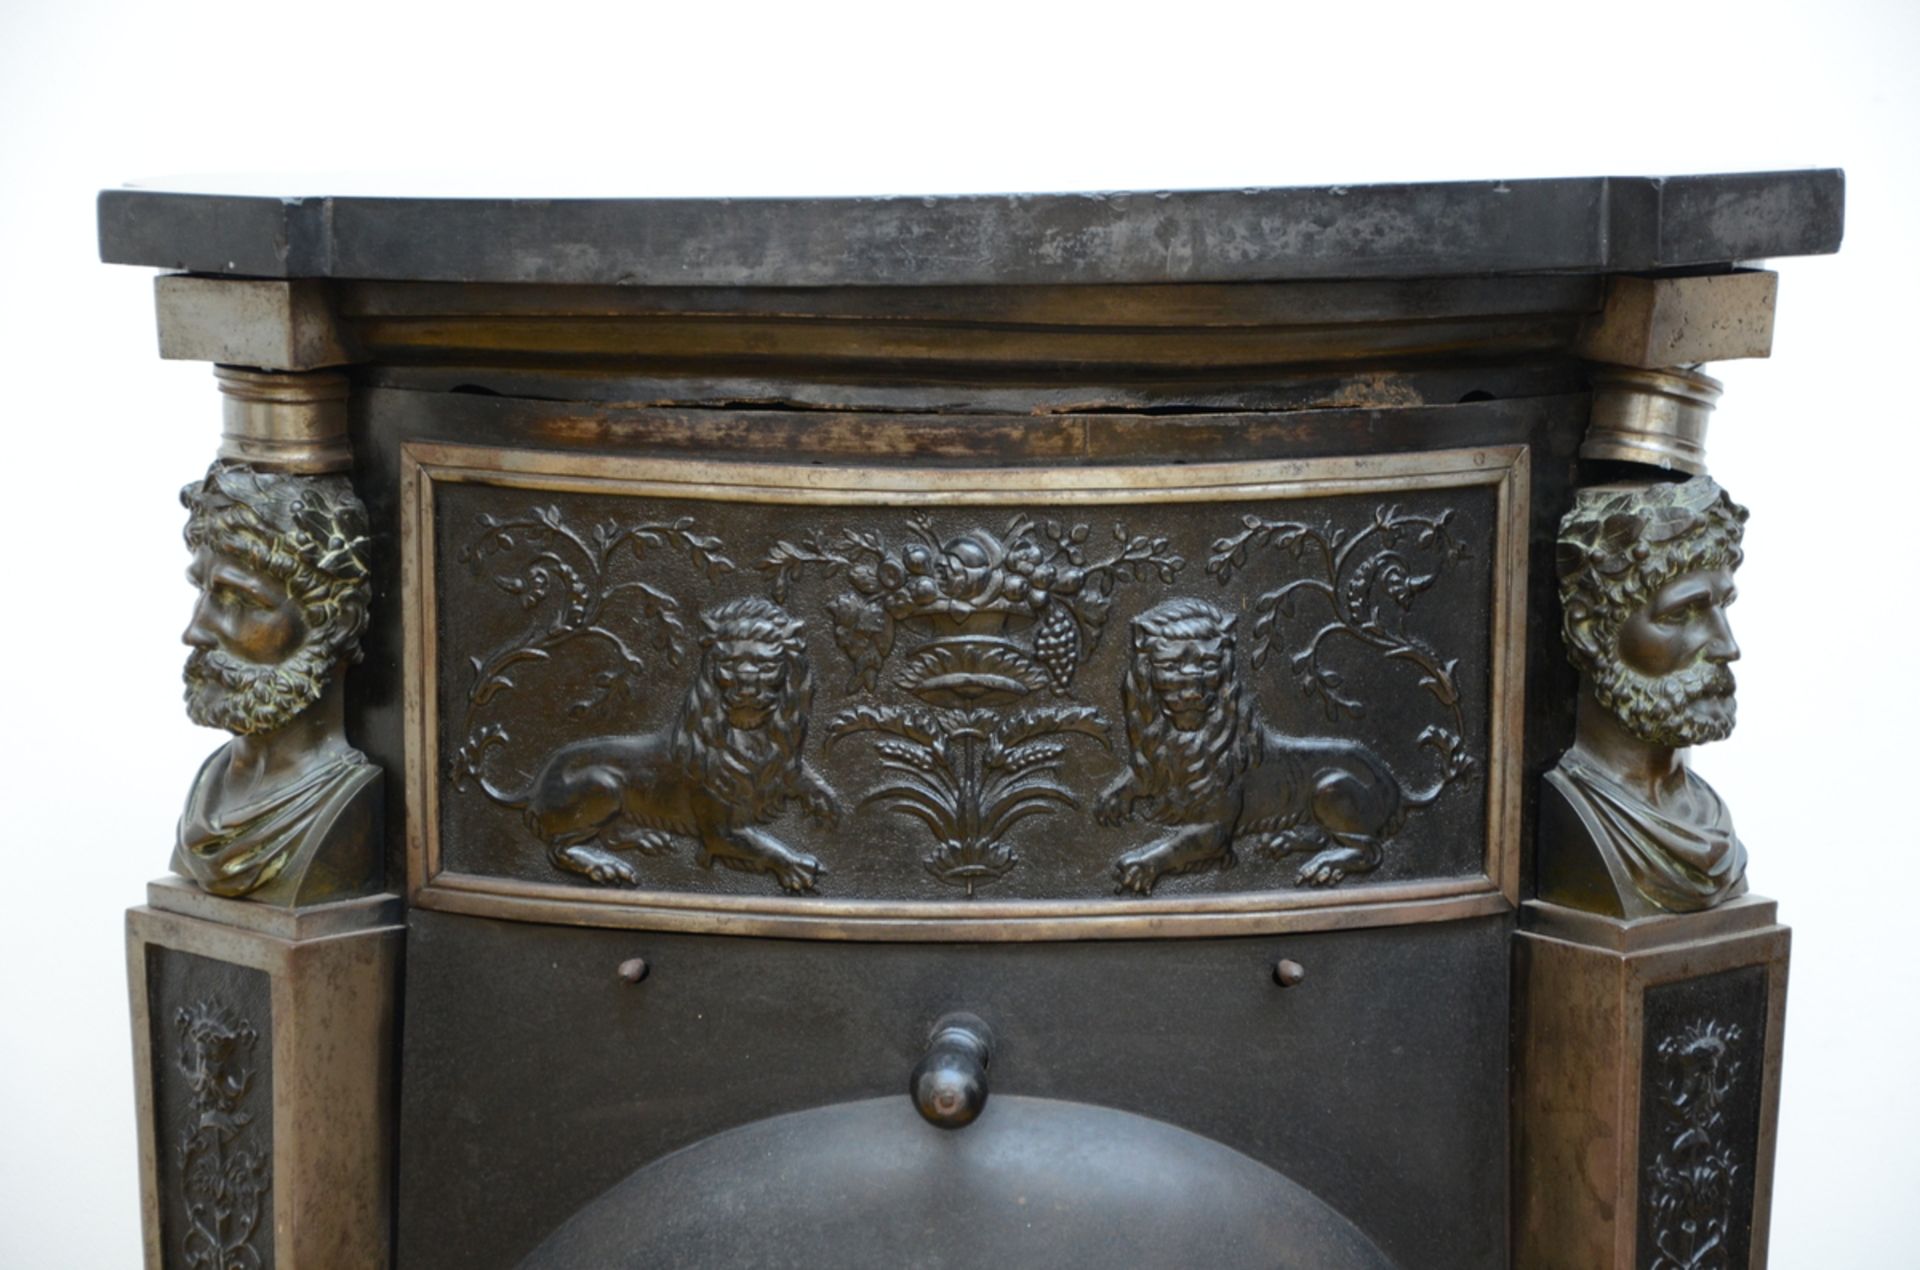 Empire stove in fonte with bronze figures and a marble top (100x52cm) - Bild 2 aus 3